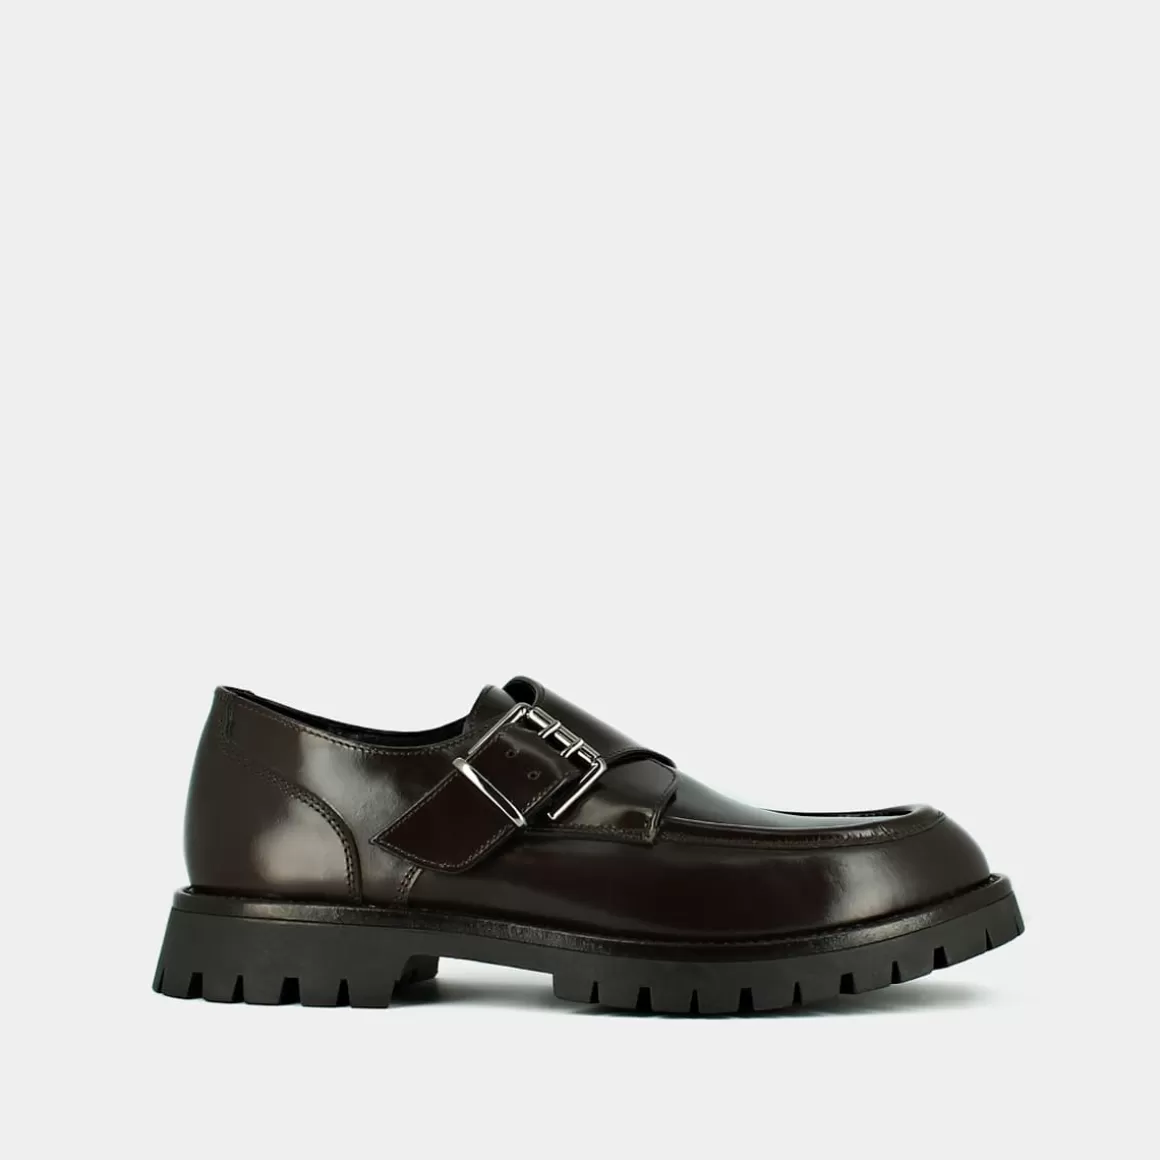 Derbies with flat heels, buckles and visible stitching<Jonak Best